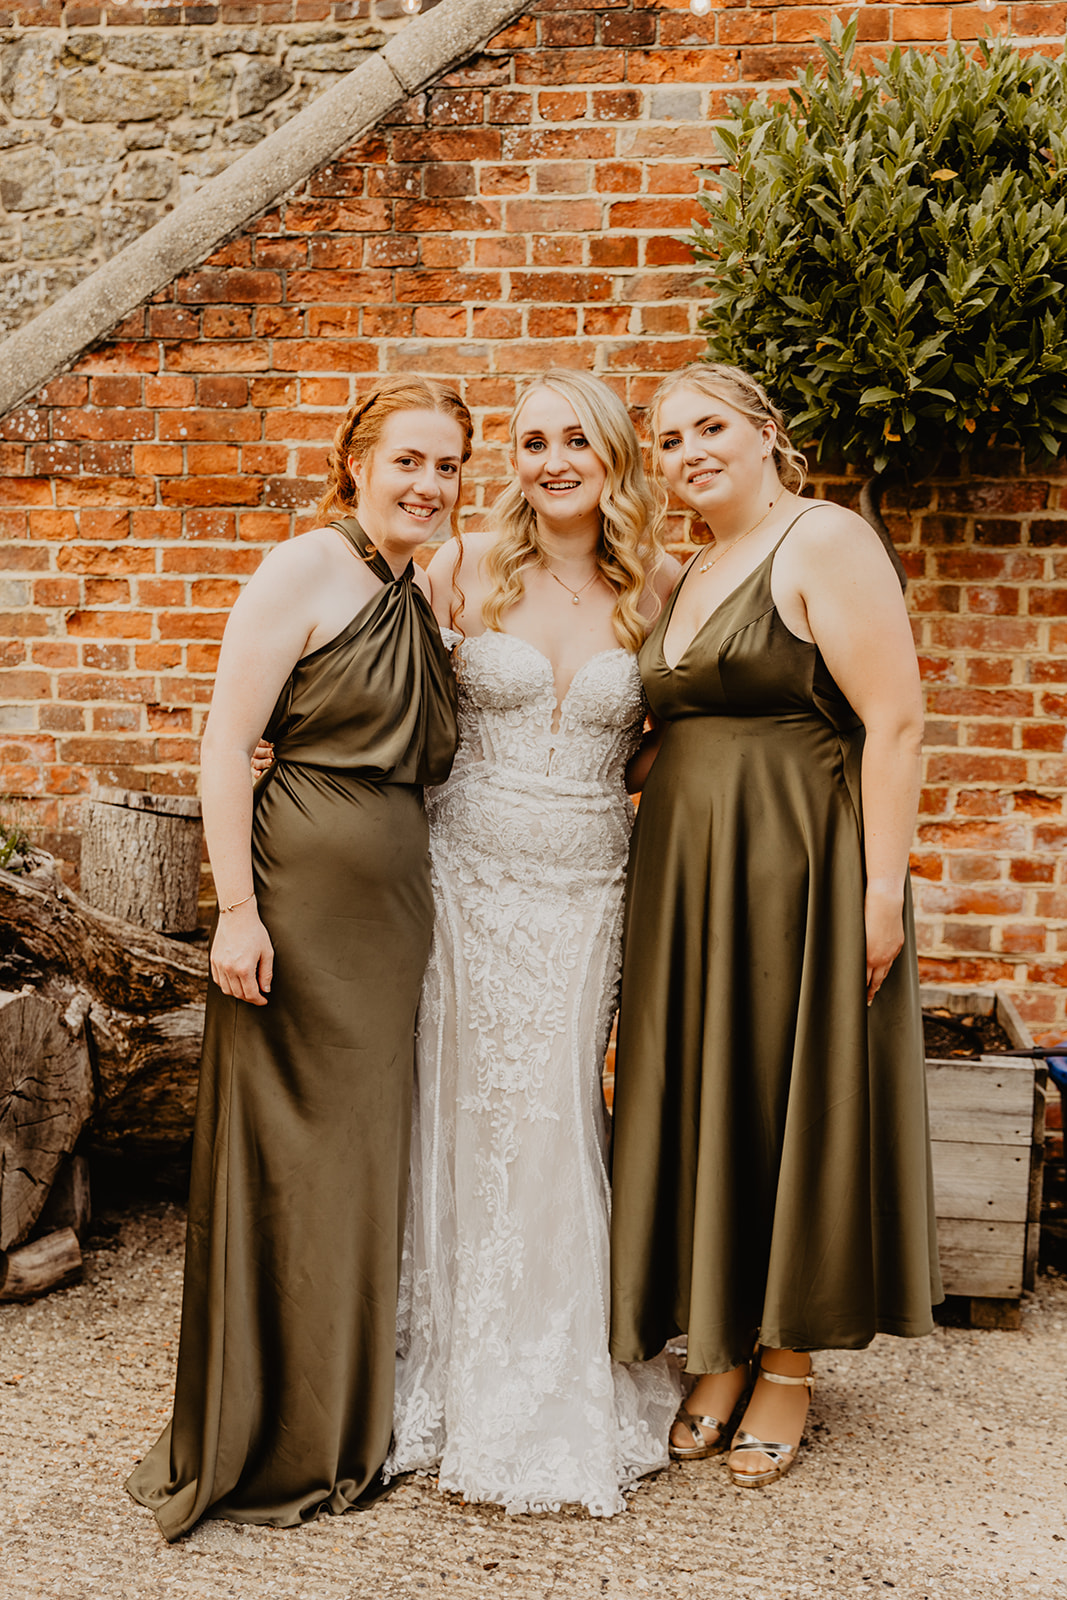 Bride and bridesmaids at a Southlands barn wedding, Sussex. Photo by OliveJoy Photography.